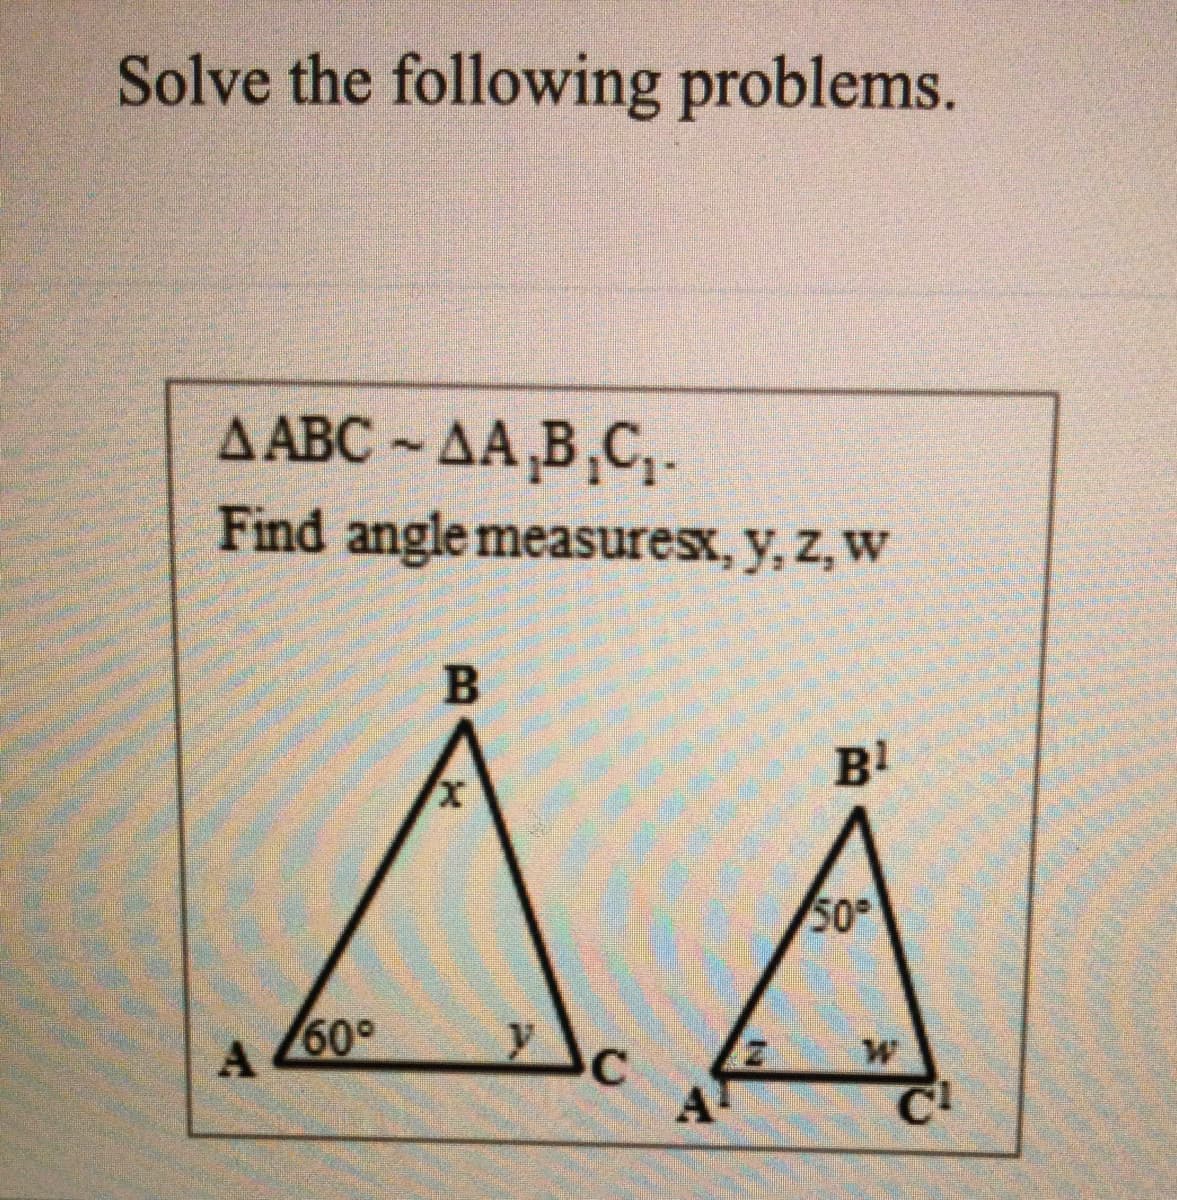 Solve the following problems.
Д АВС- ДА В, С,-
Find angle measuresx, y, z, w
B!
50
60°
A
B.
